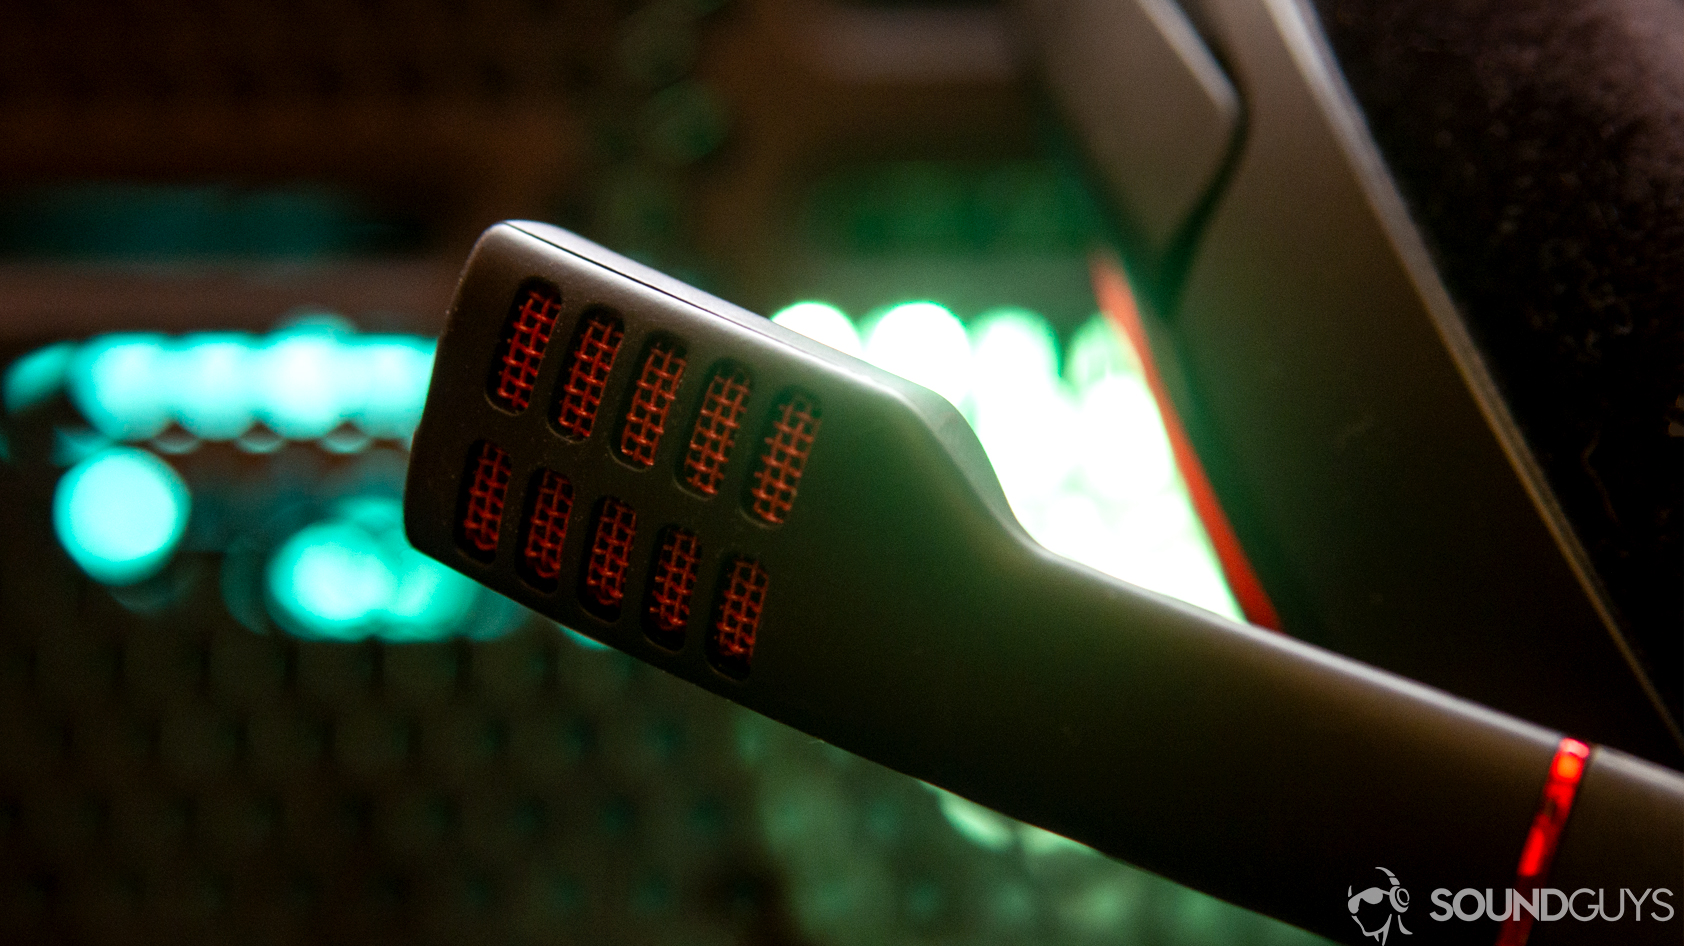 A photo of the Sennheiser Game One's microphone in front of a computer with RGB LED lighting.